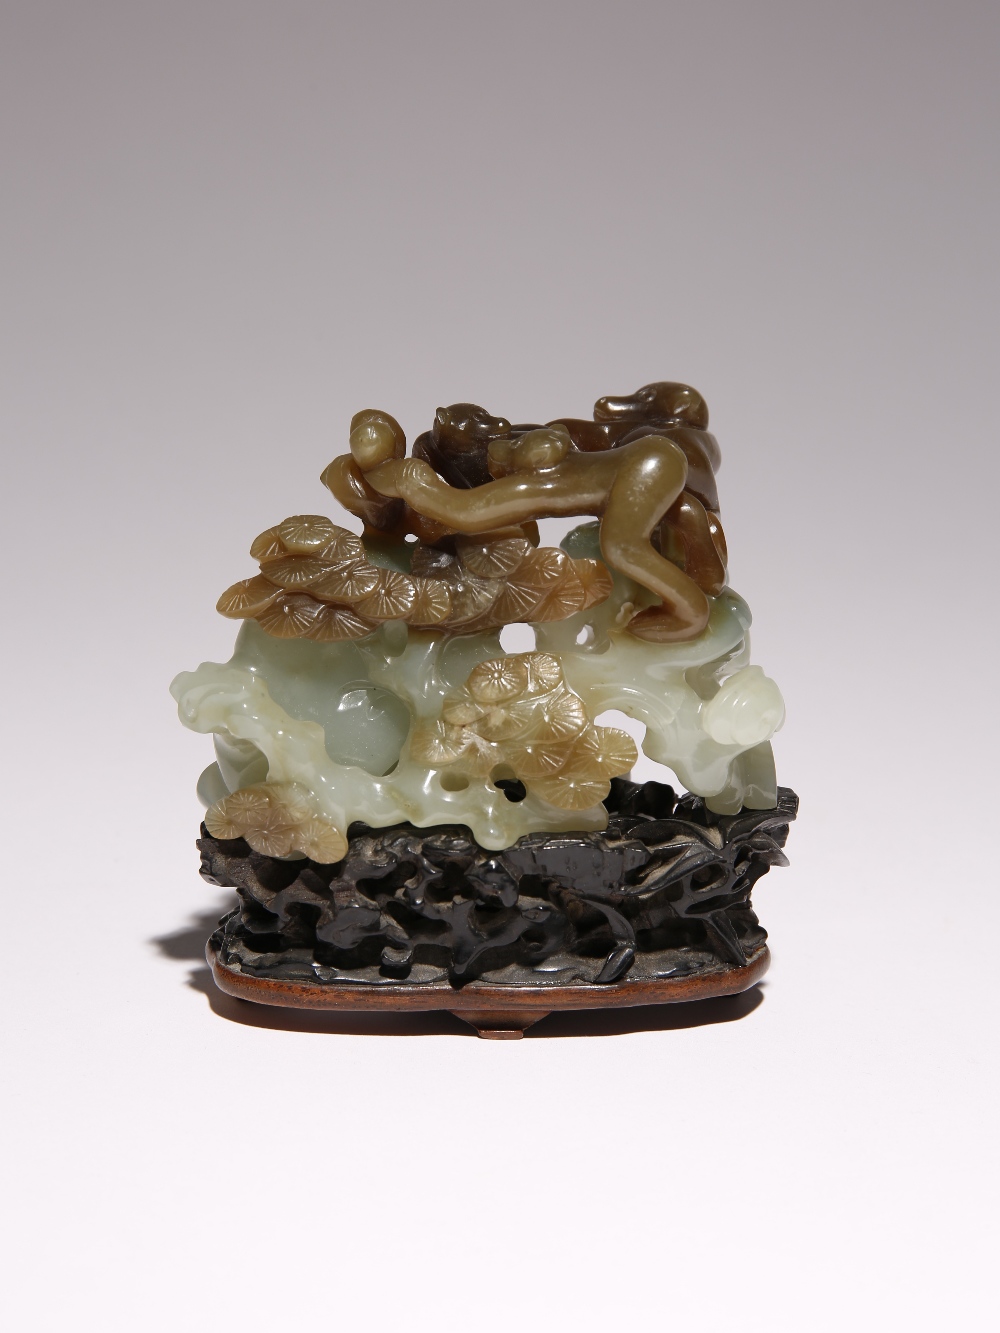 A CHINESE CELADON AND RUSSET JADE 'MONKEYS' GROUP 18TH/19TH CENTURY Deeply carved with three monkeys